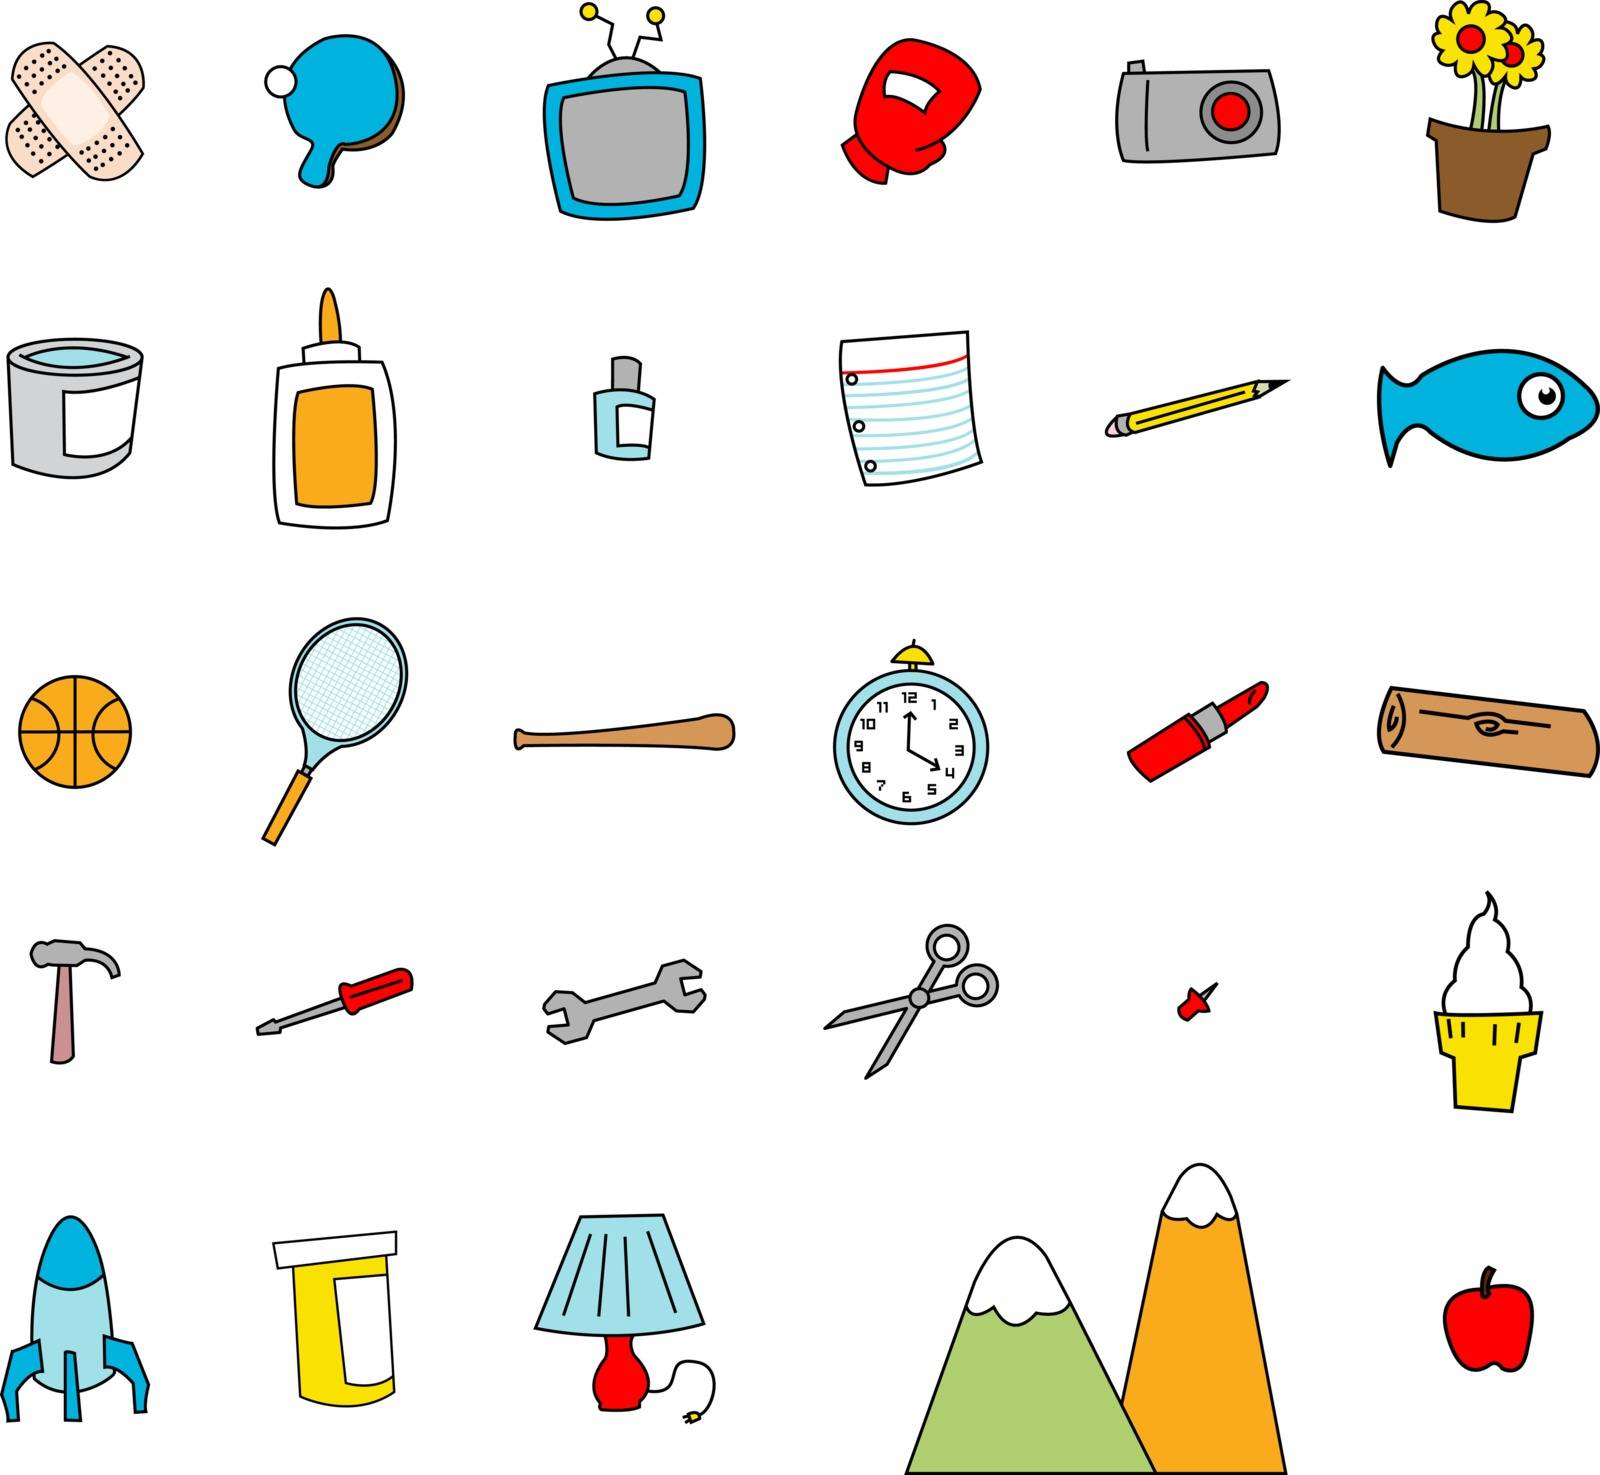 Childlike Doodles of Everyday Objects by fictionalhead